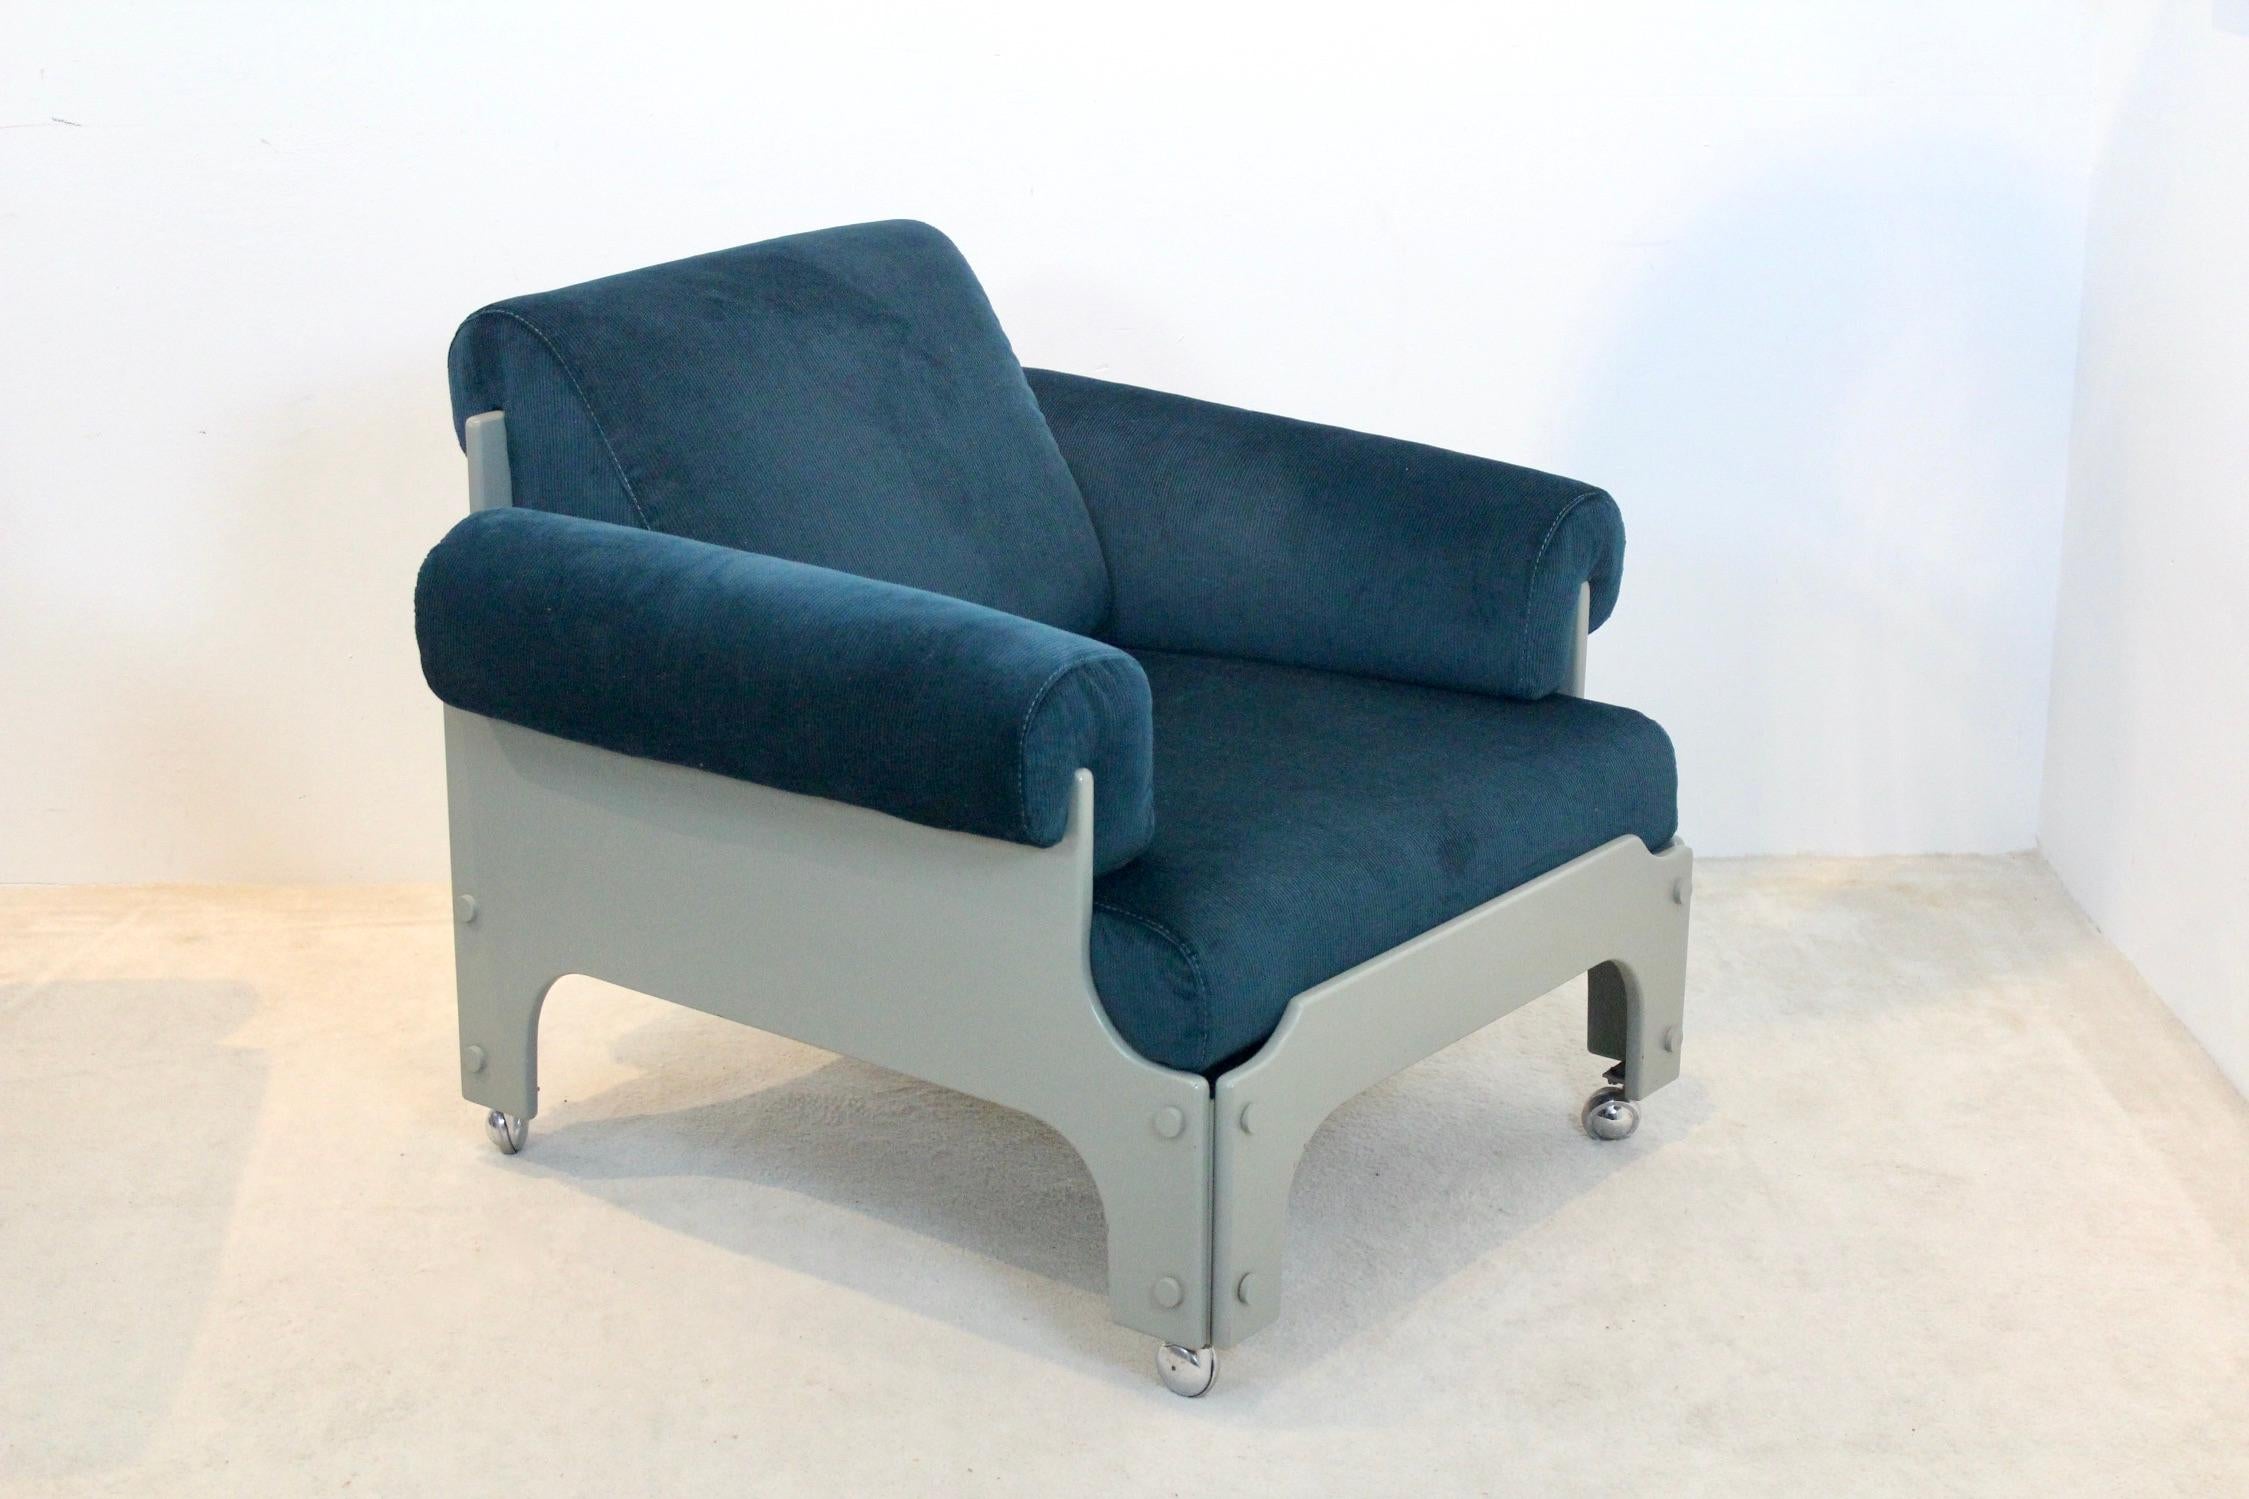 Very Rare SZ 85 Spectrum Easy Chairs by Jan Pieter Berghoef, 1968 For Sale 3